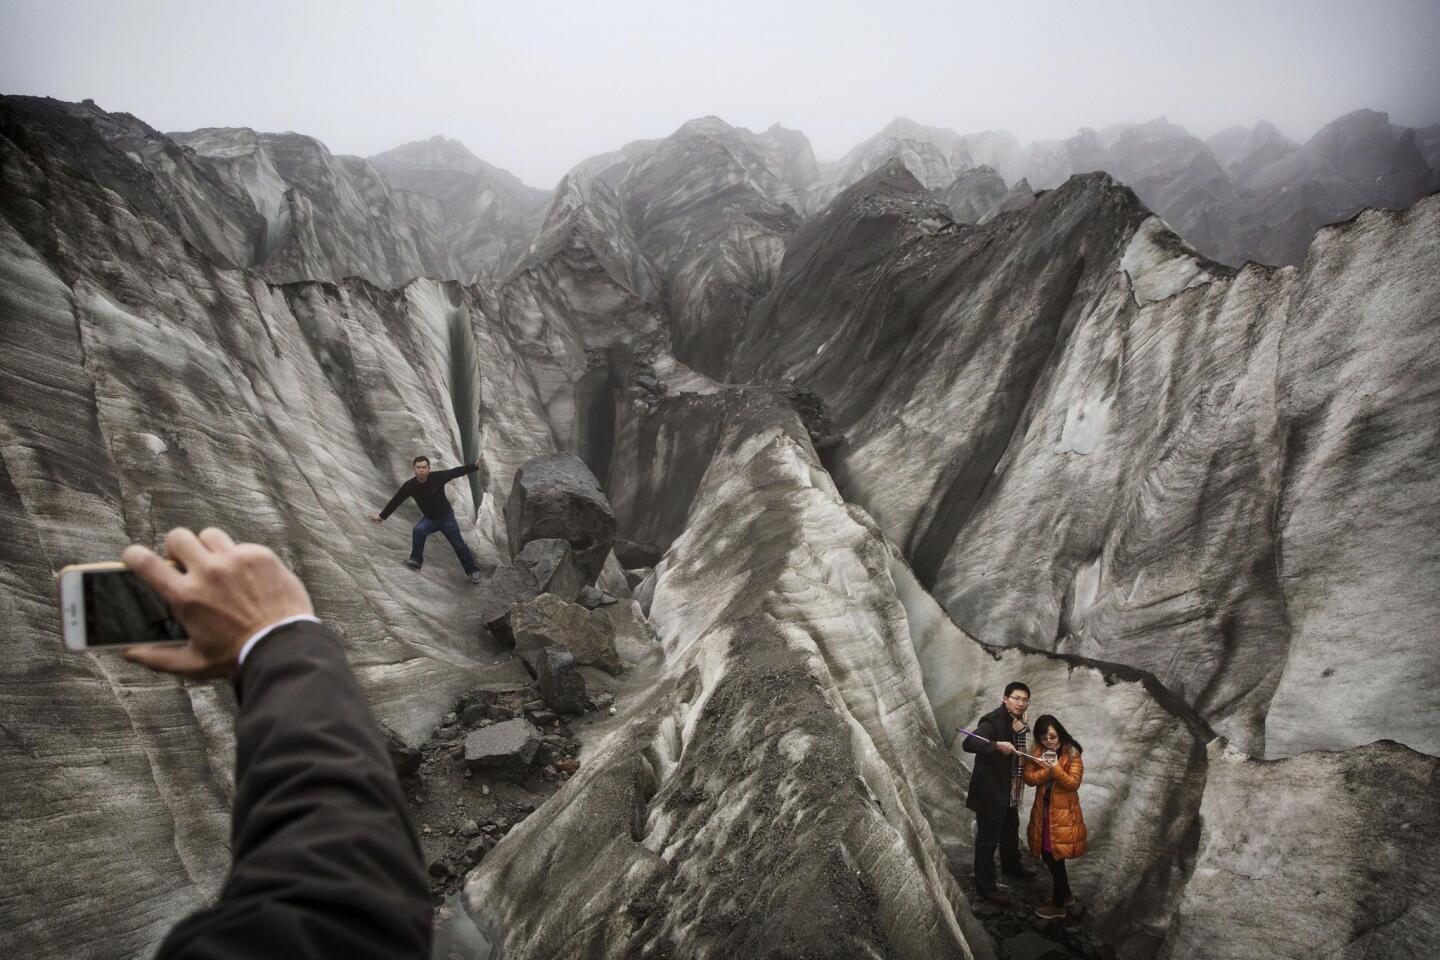 Chinese tourist s pose for pictures in the tongue of Glacier 1 at the base of the 24,790 ft Mount Gongga, known in Tibetan as Minya Konka in Hailuogou, Garze Tibetan Autonomous Prefecture.